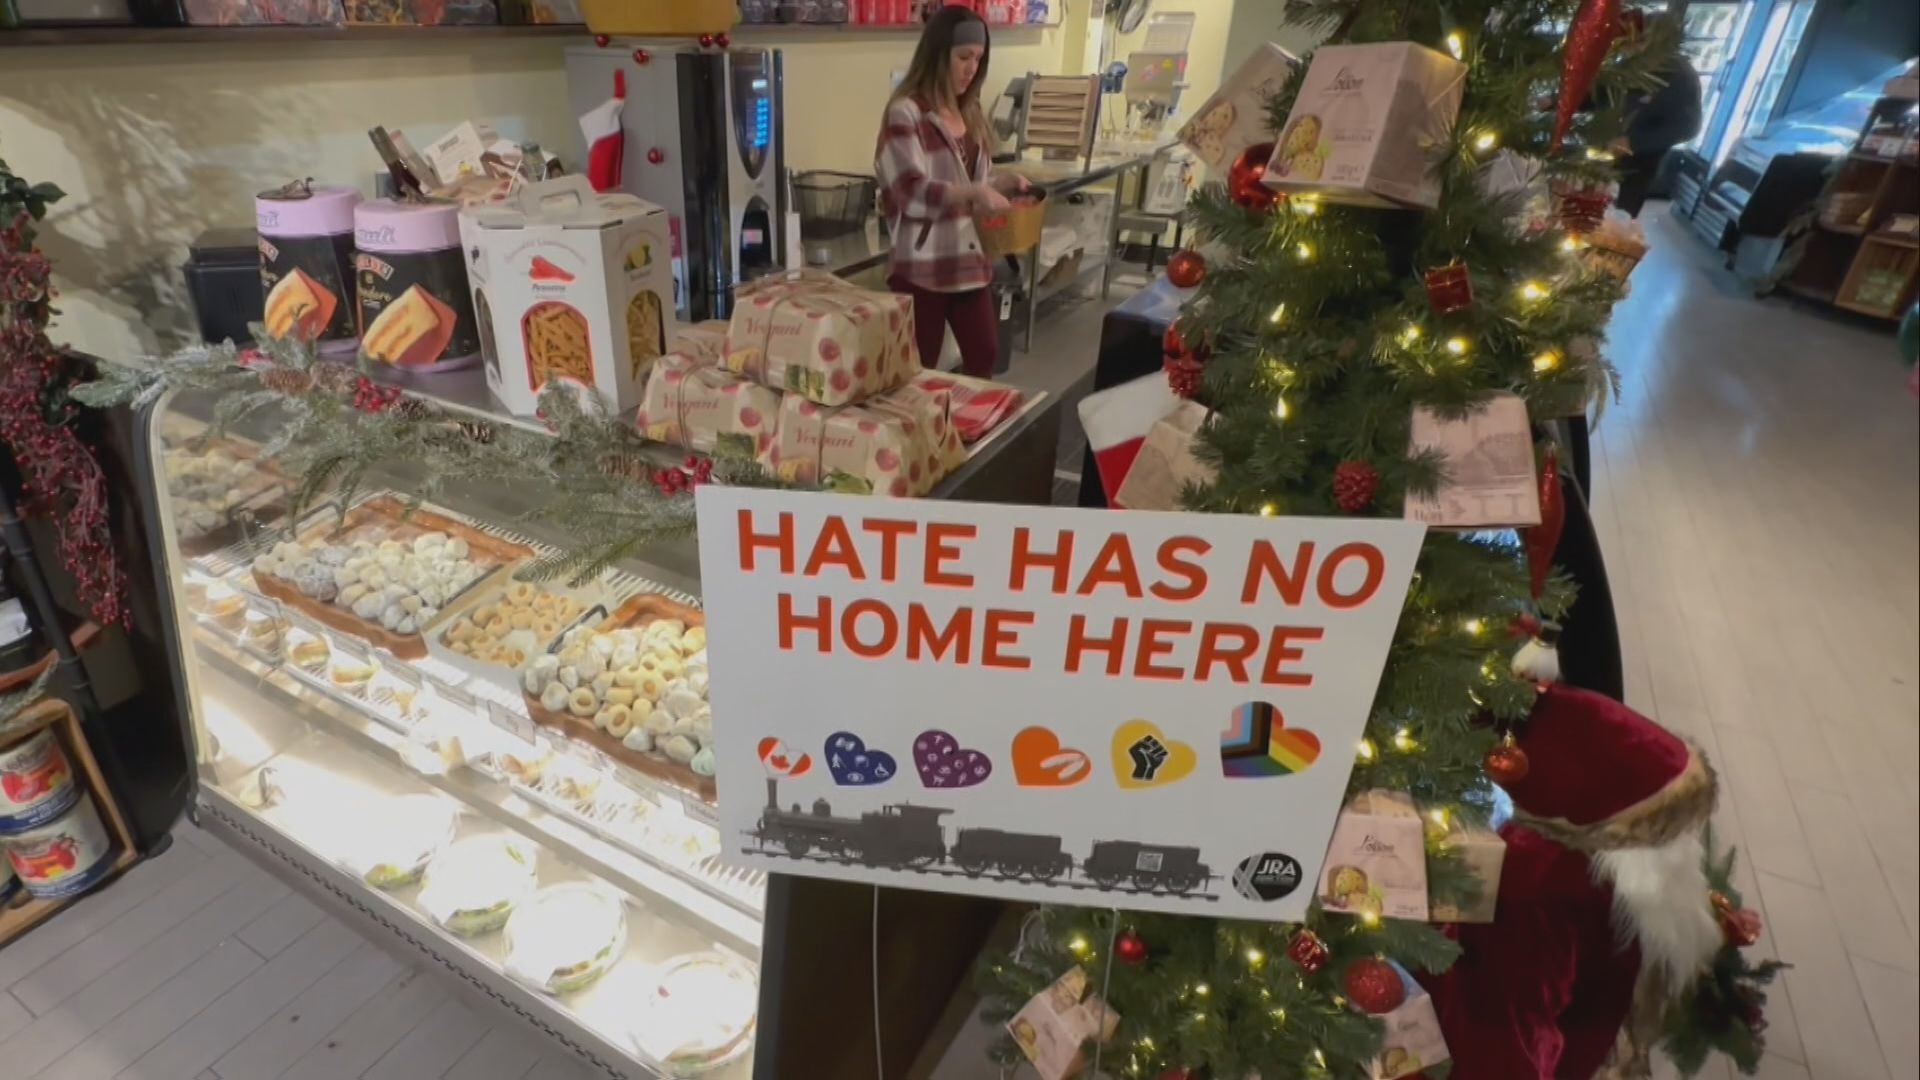 Junction Residents Association builds 'Hate has no home here' campaign